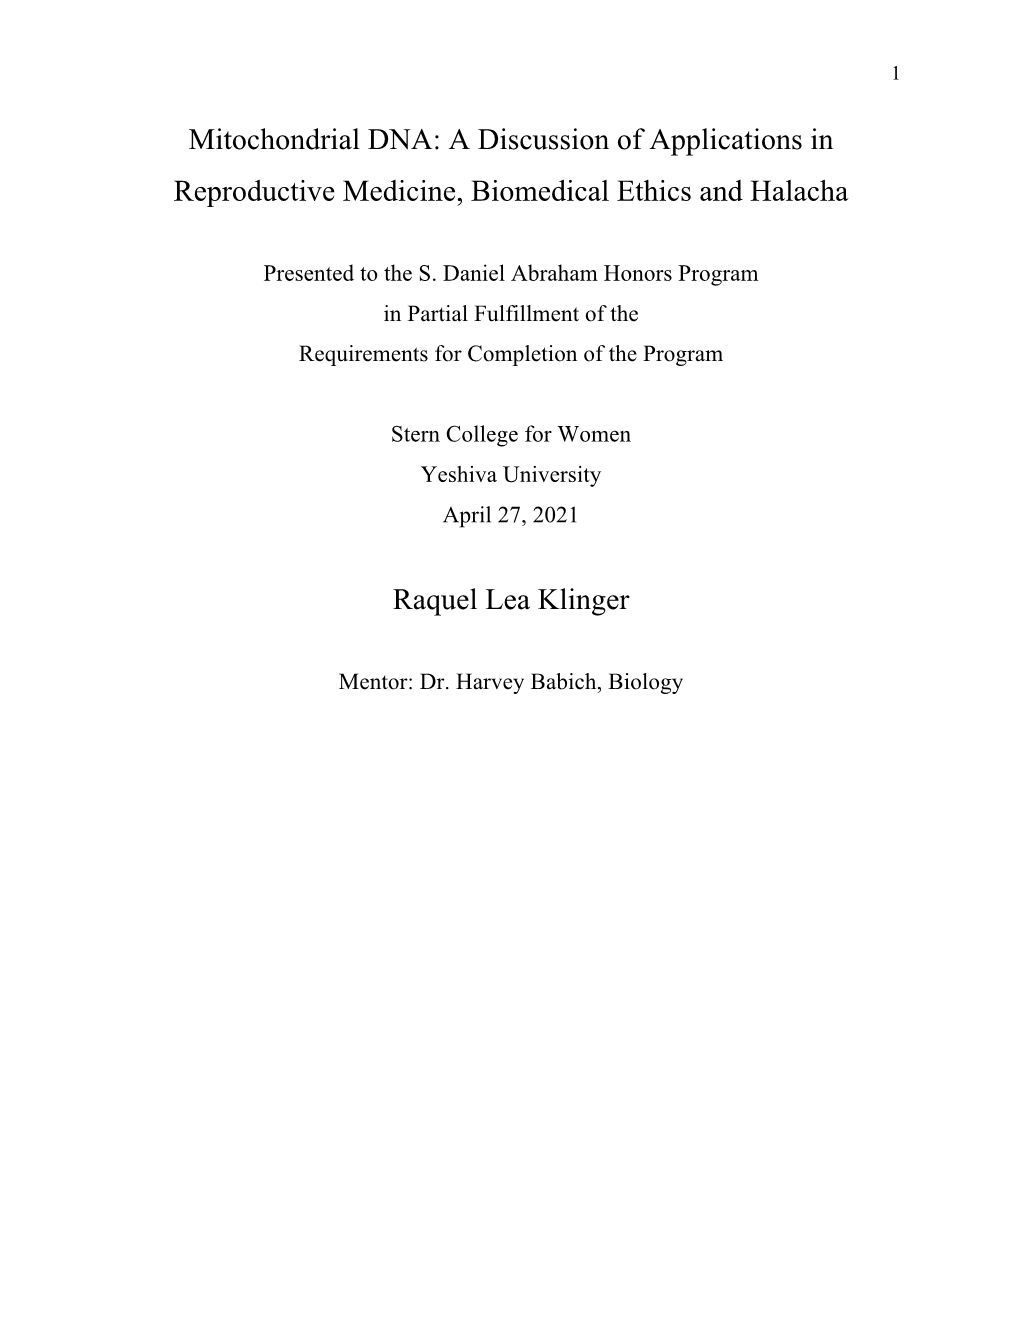 Mitochondrial DNA: a Discussion of Applications in Reproductive Medicine, Biomedical Ethics and Halacha